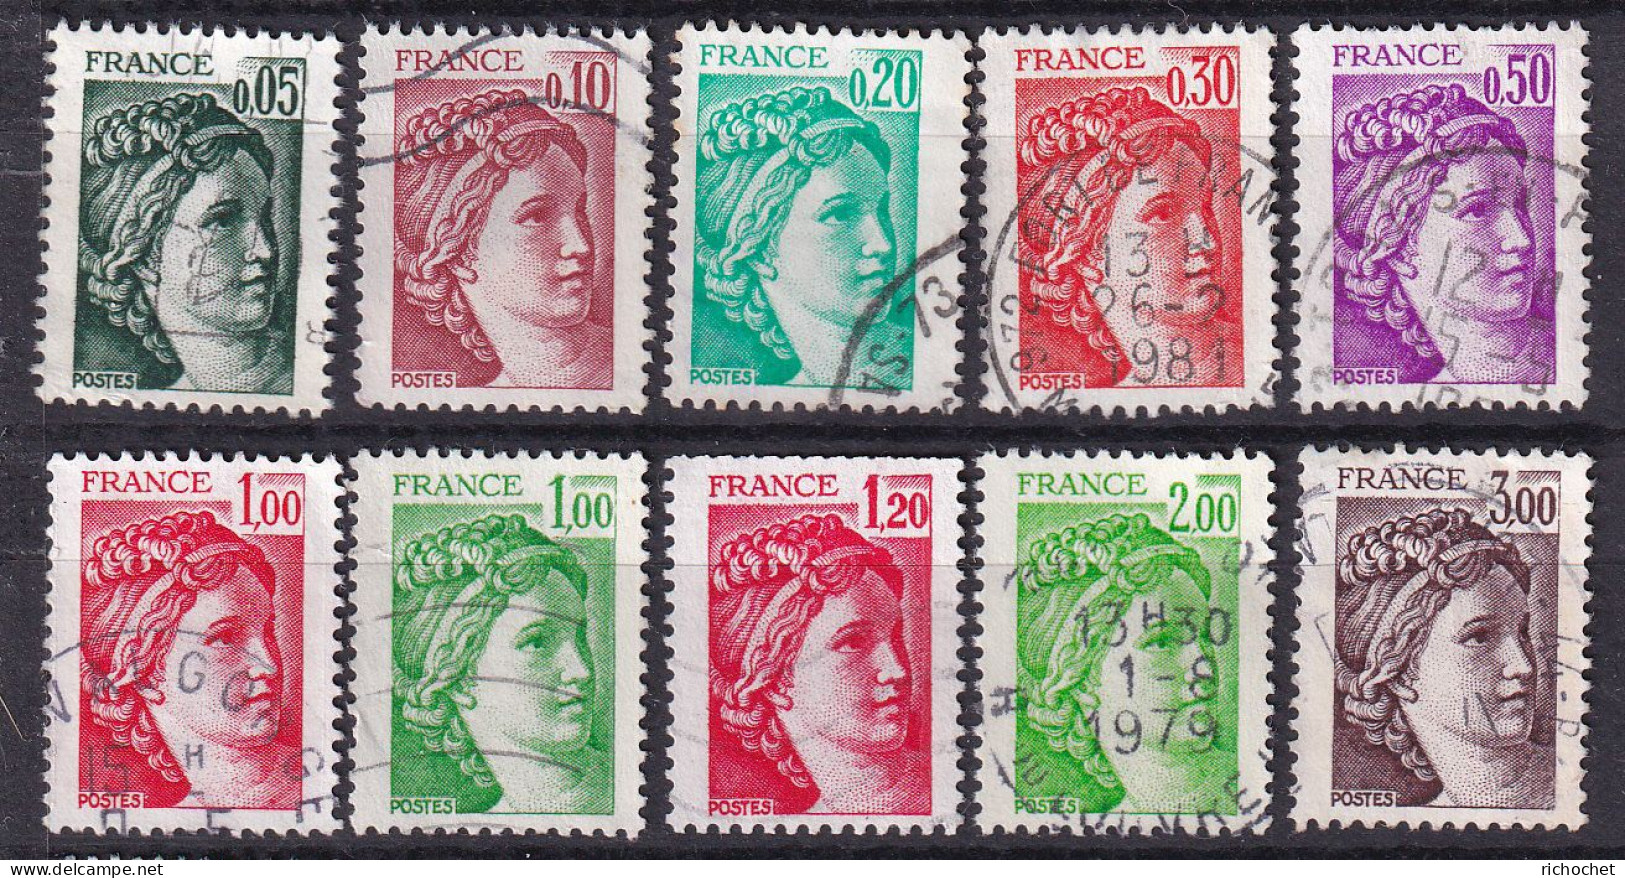 France 1964 + 1965 + 1967 + 1968 + 1969 + 1972 à 1974 + 1977 + 1979 ° - Used Stamps